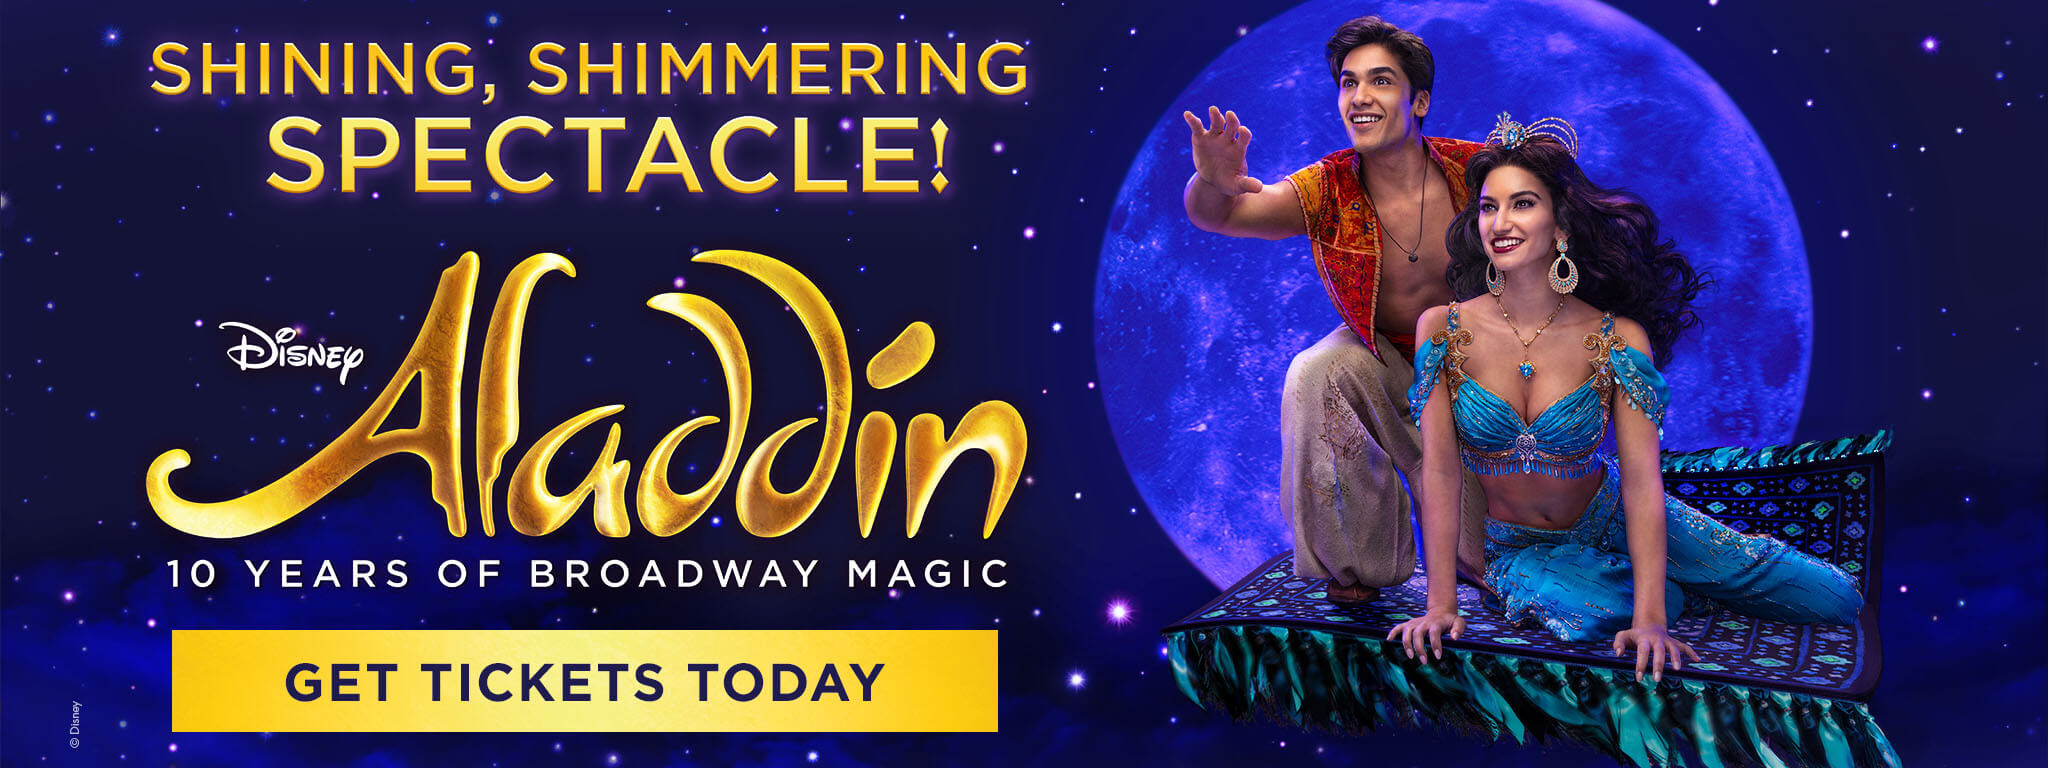 Disney ALADDIN - Shining, Shimmering Spectacle! - Get Tickets Today